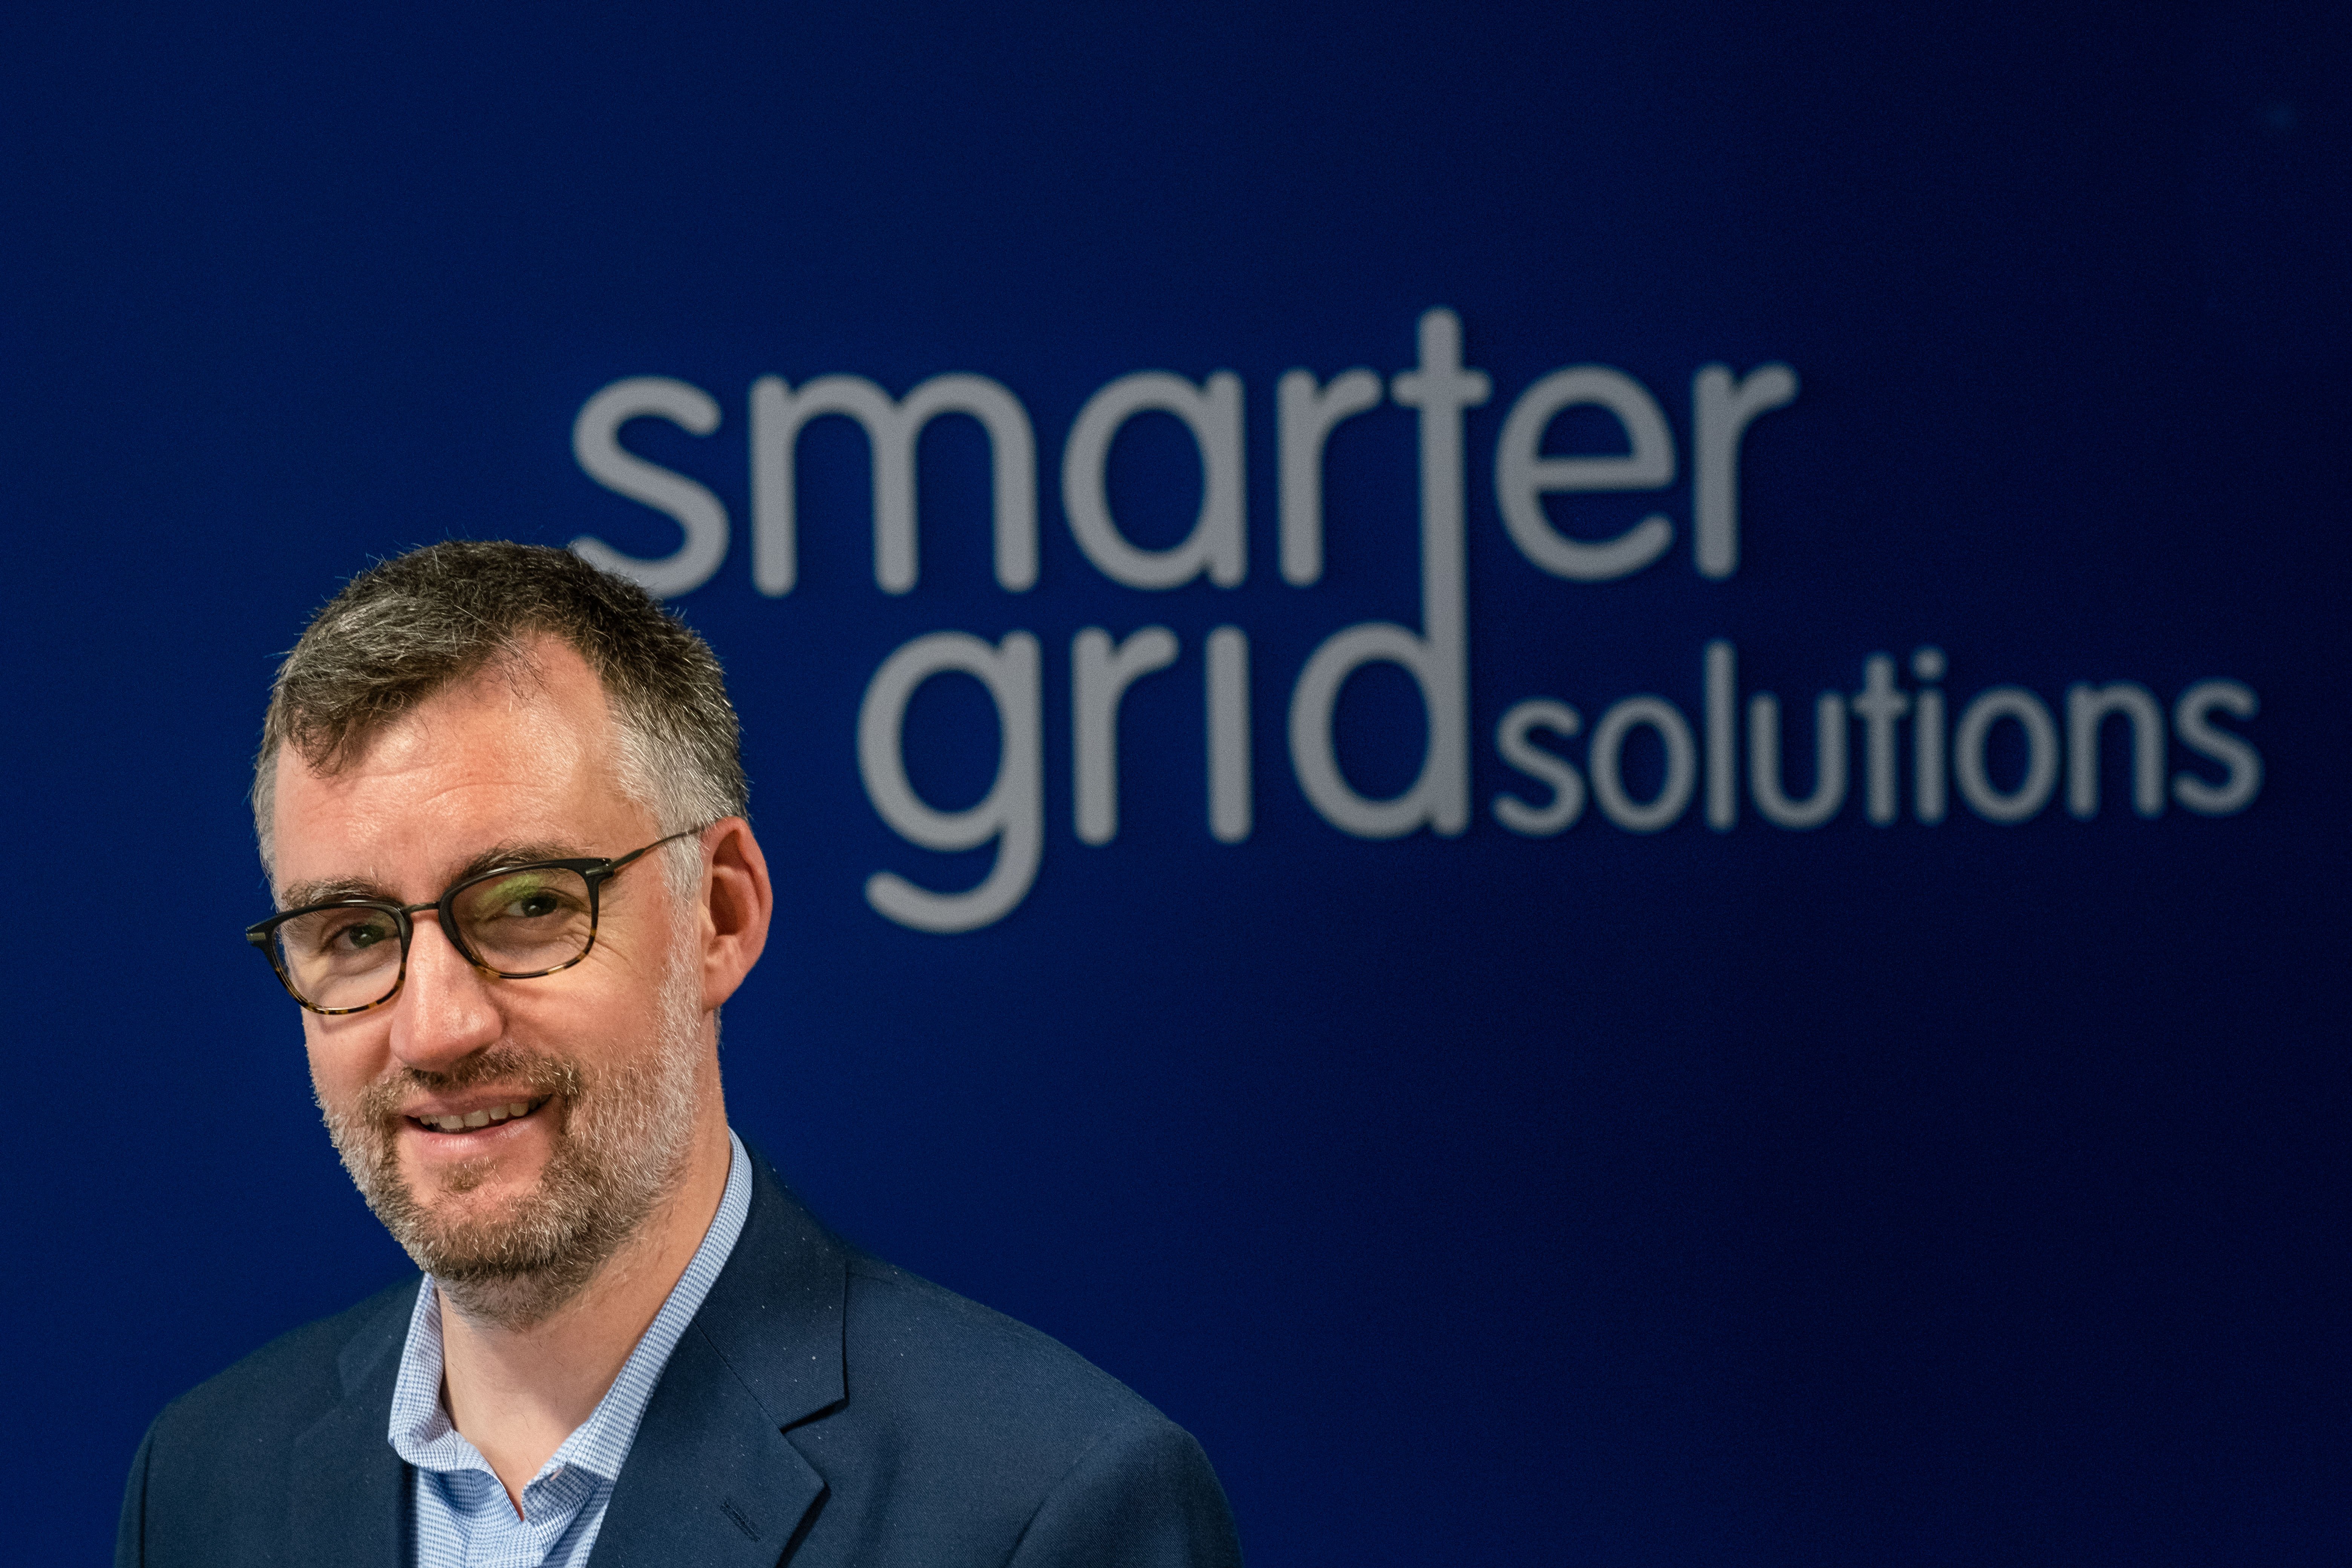 Euan Davidson, CTO of Smarter Grid Solutions. Photographed by Chris Watts (1)